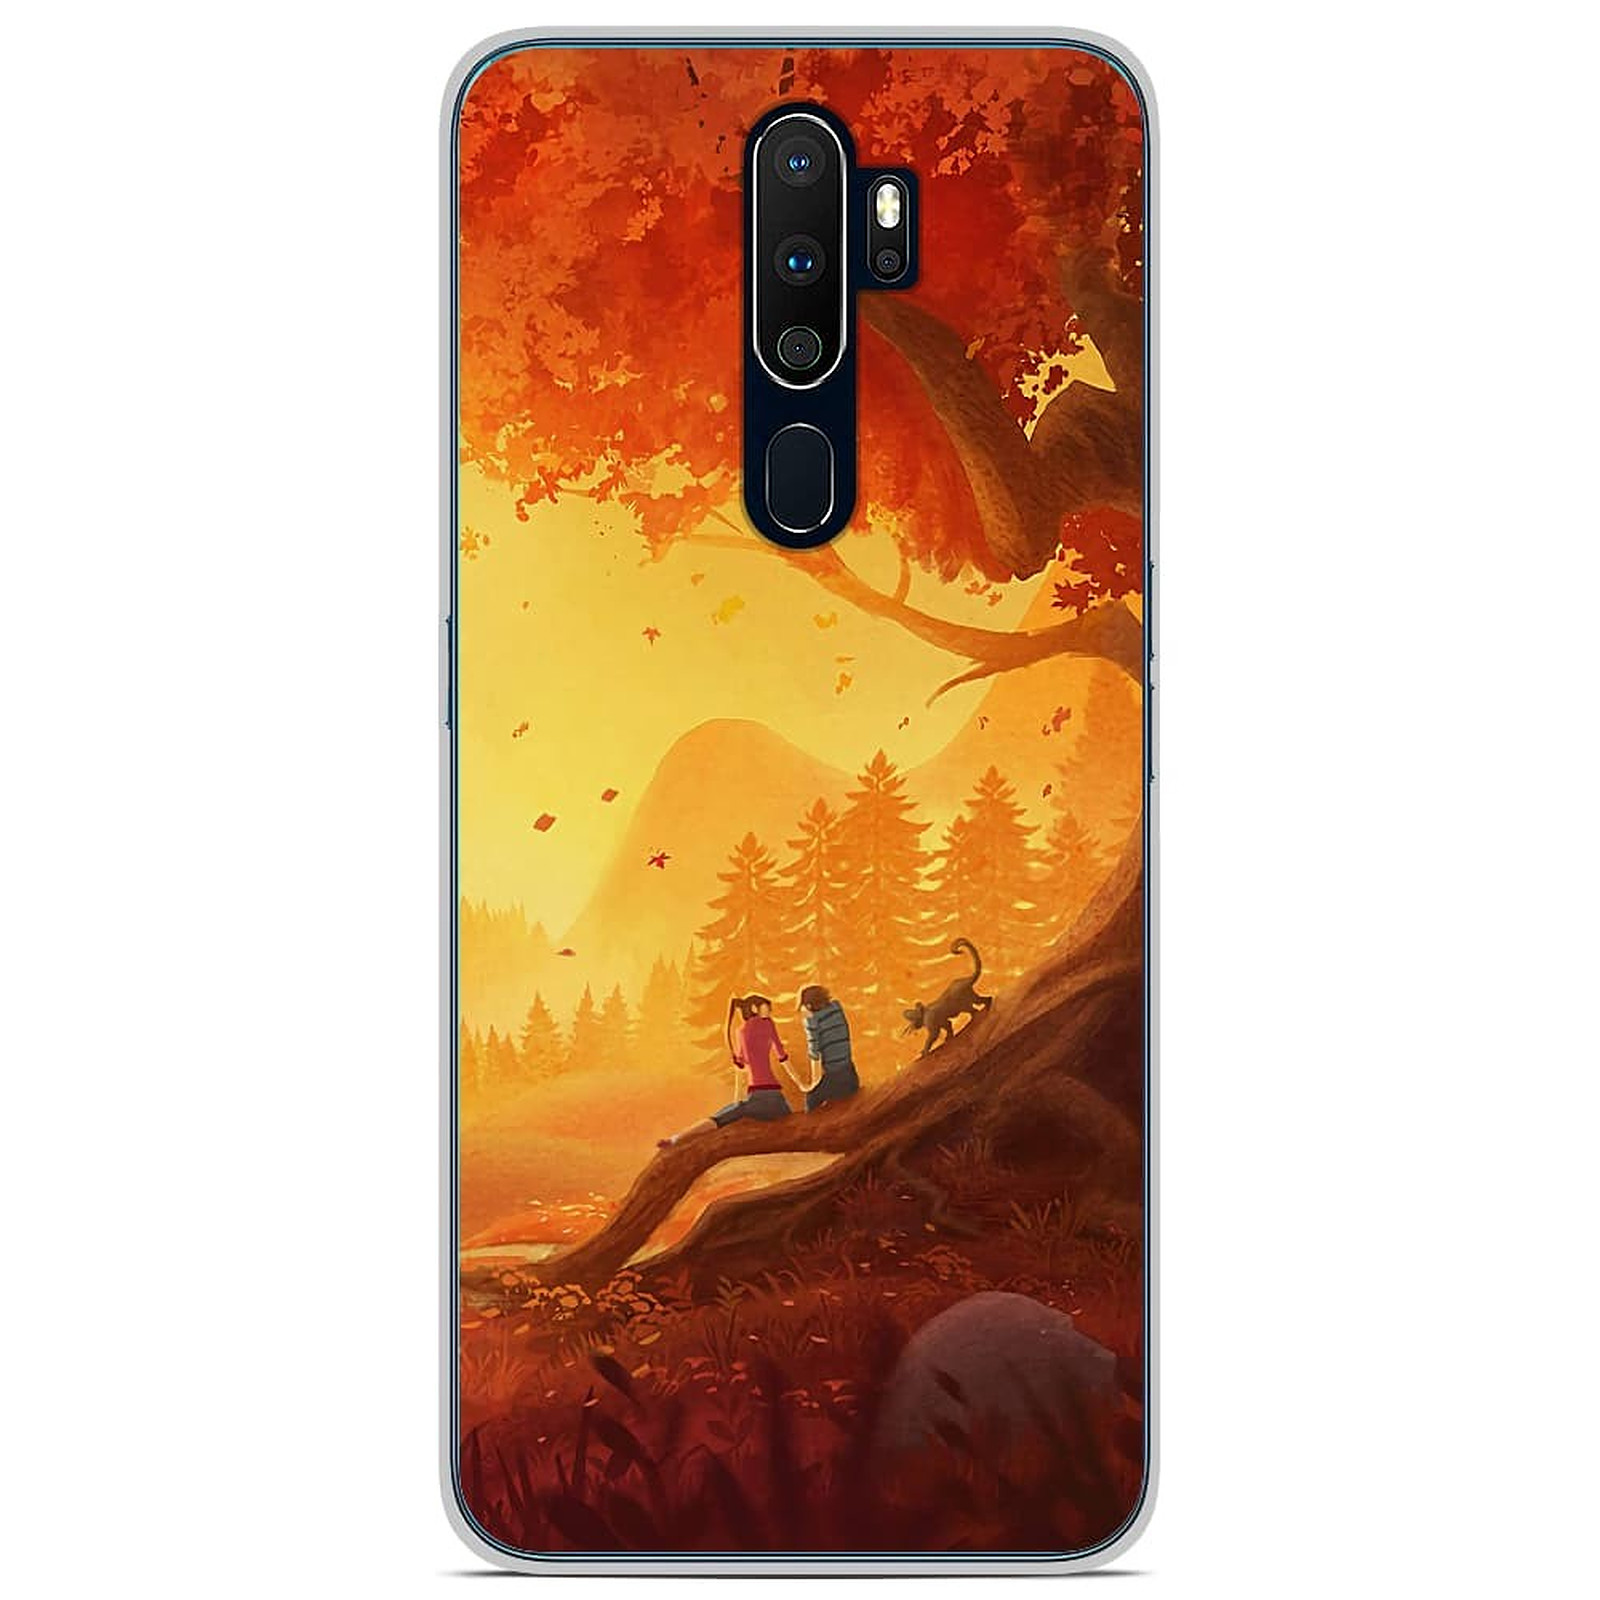 1001 Coques Coque silicone gel Oppo A5 2020 motif Automne a  deux - Coque telephone 1001Coques